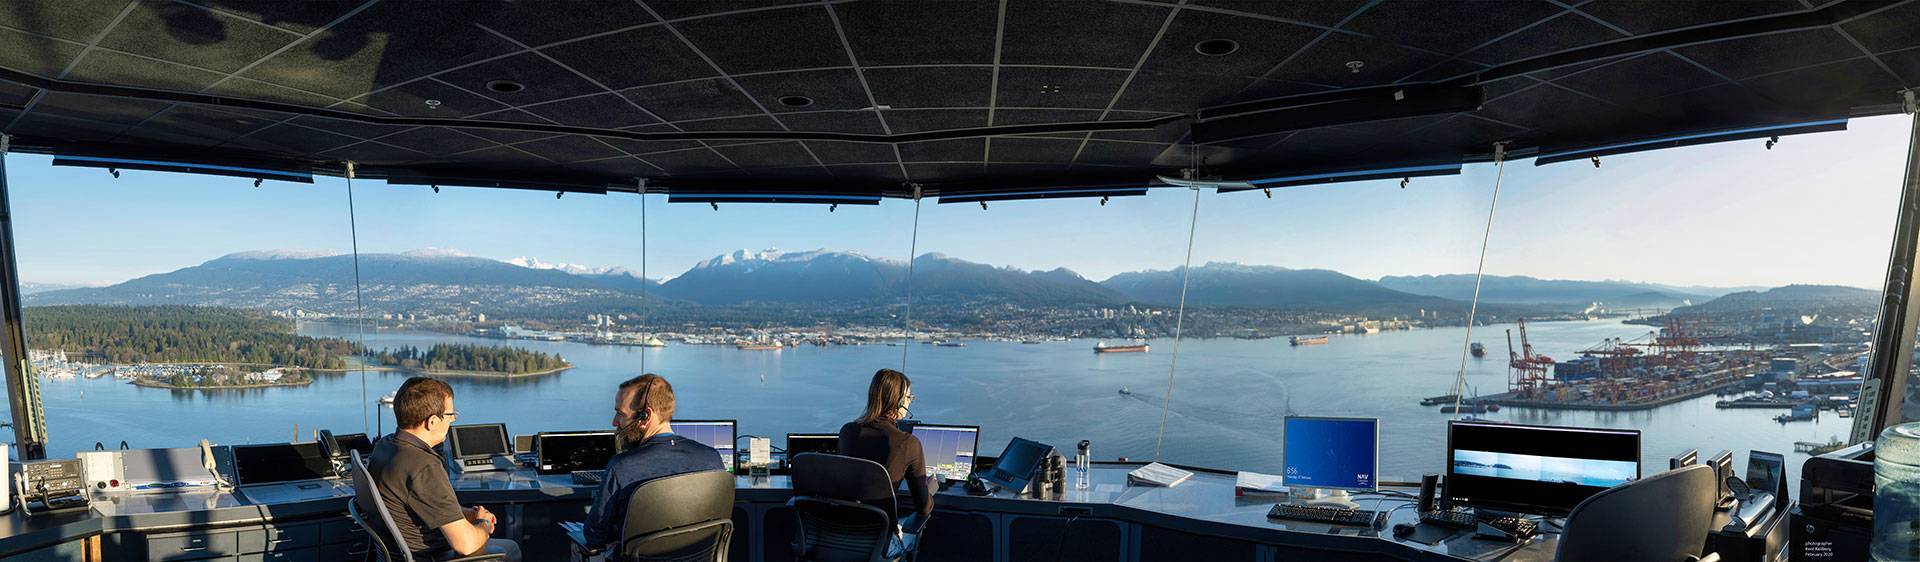 nav canada vancouver harbour control tower